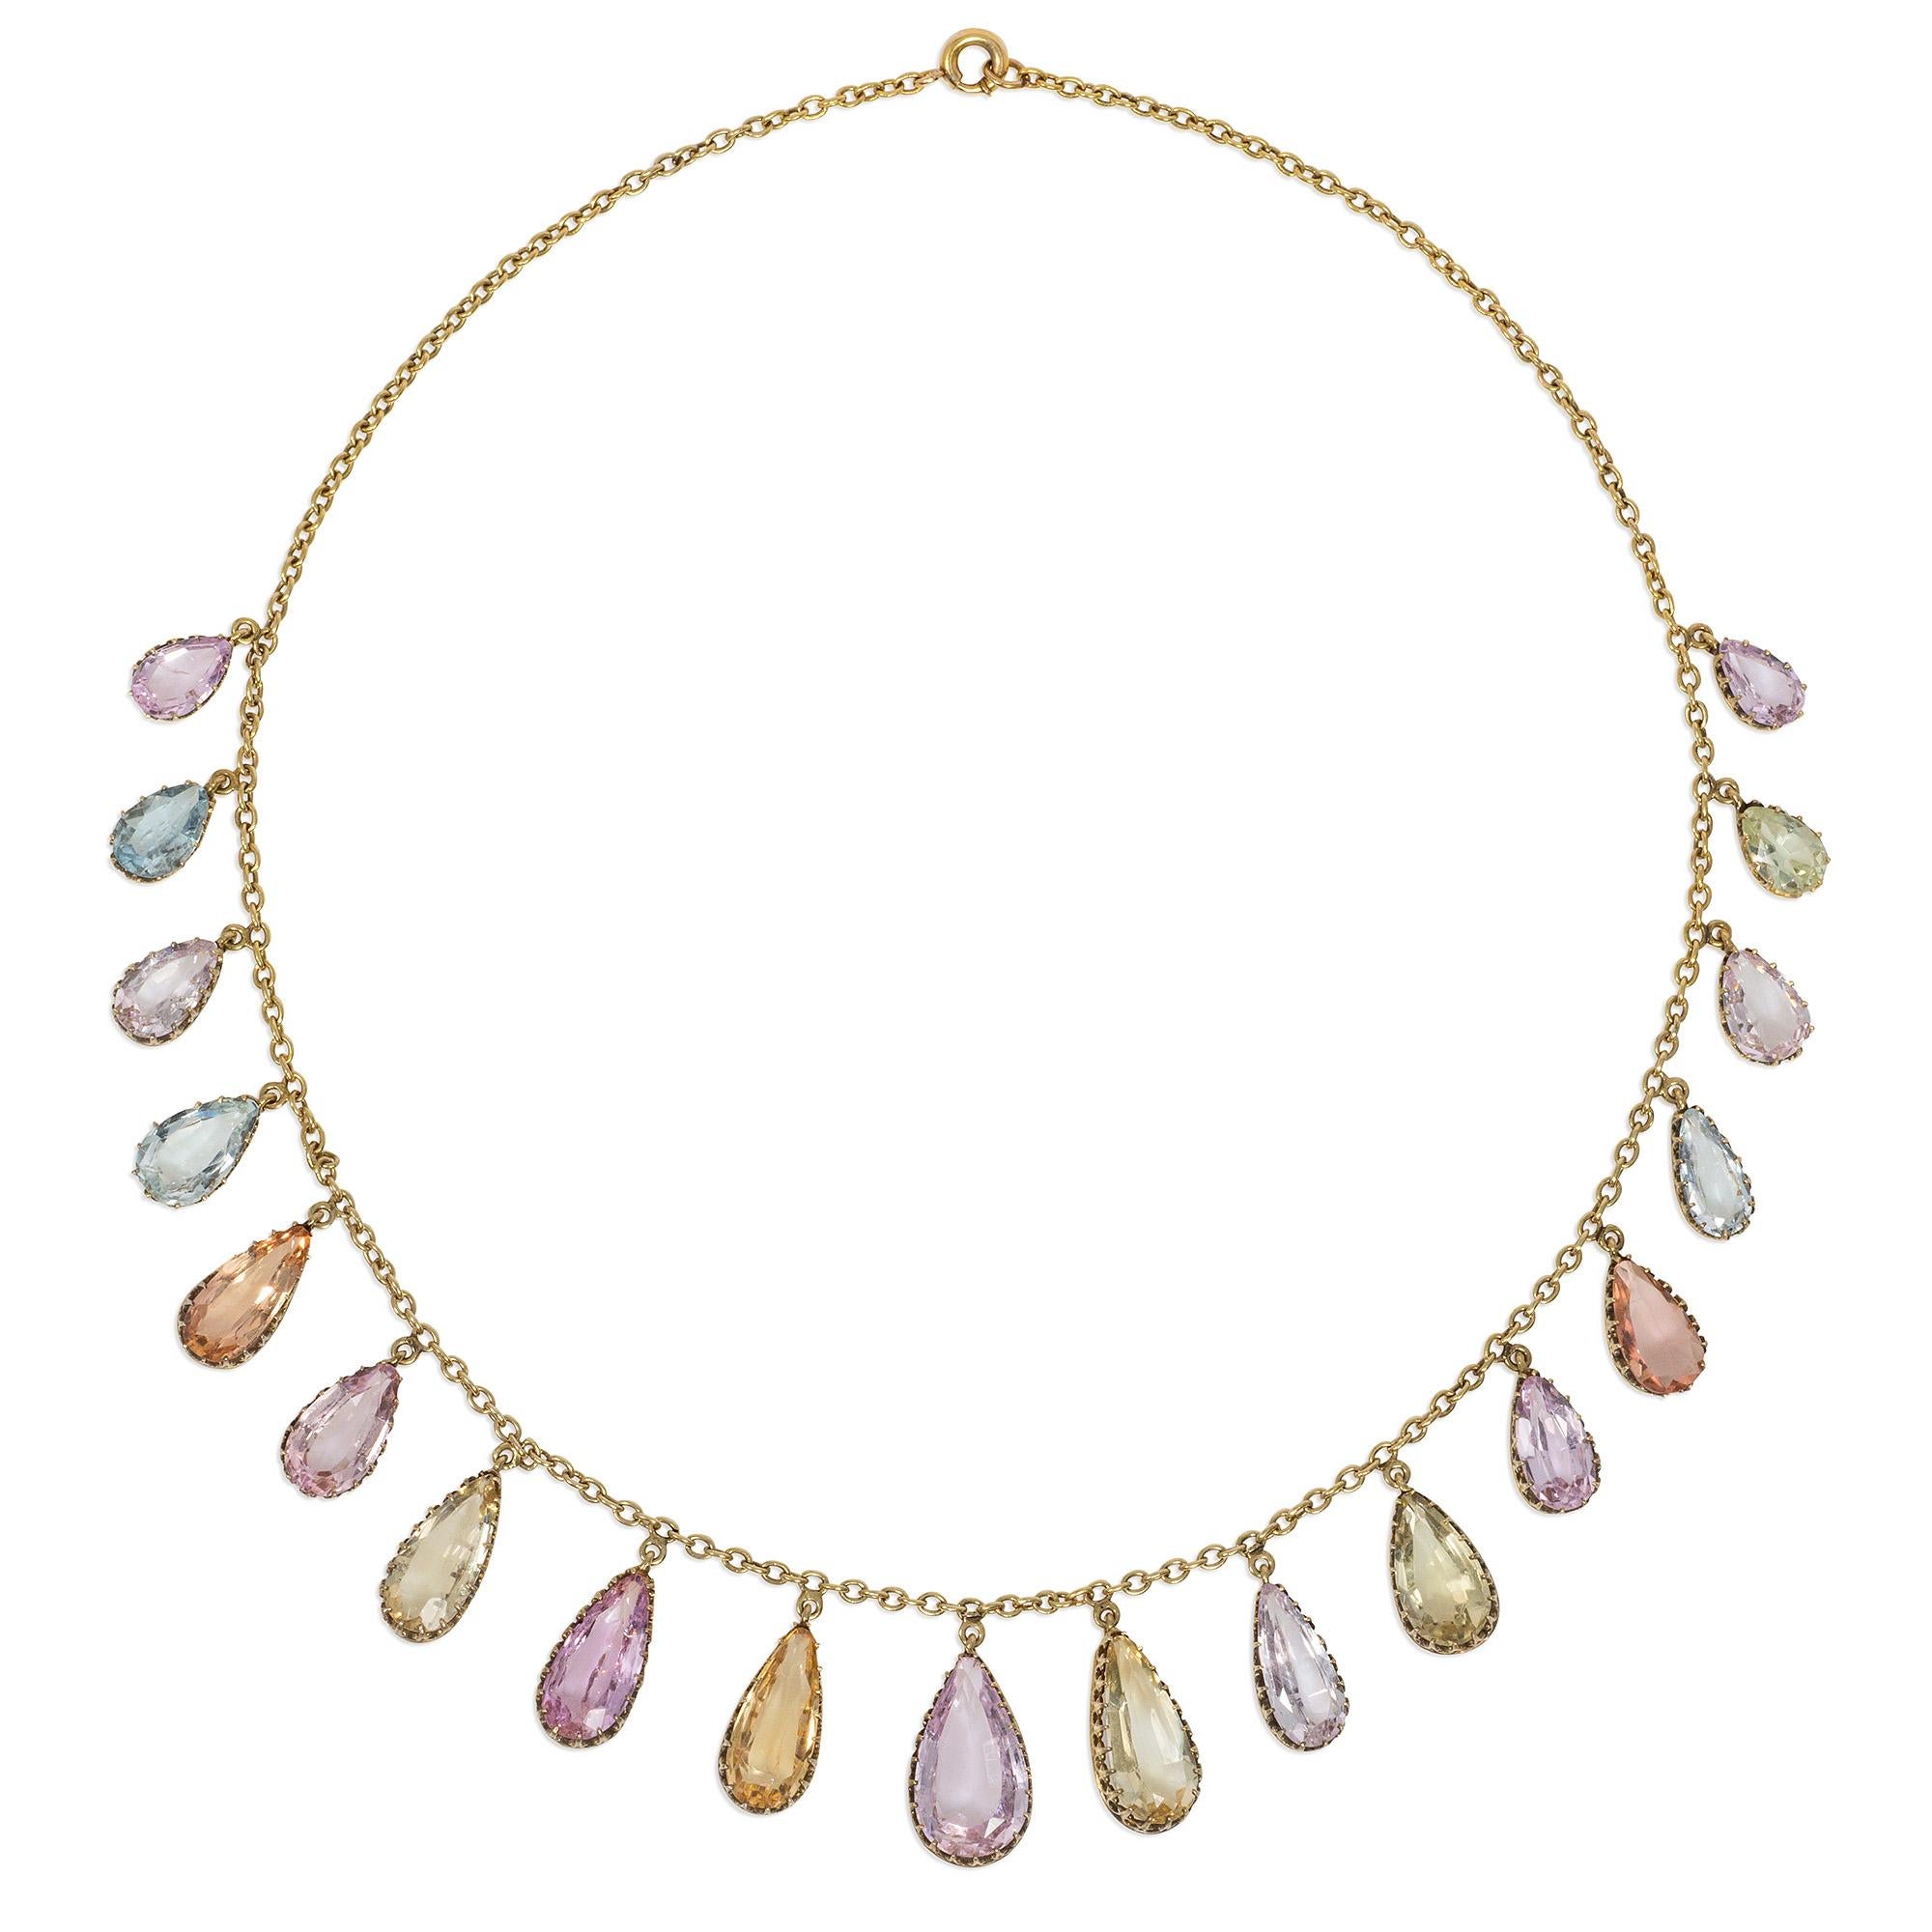 An antique Victorian period gold and topaz necklace of fringe design, comprising graduated precious topaz pear-shaped drop pendants in an array of pastel colors, in 14k.  Largest stone measures approximately 16mm long x 10mm at widest point;